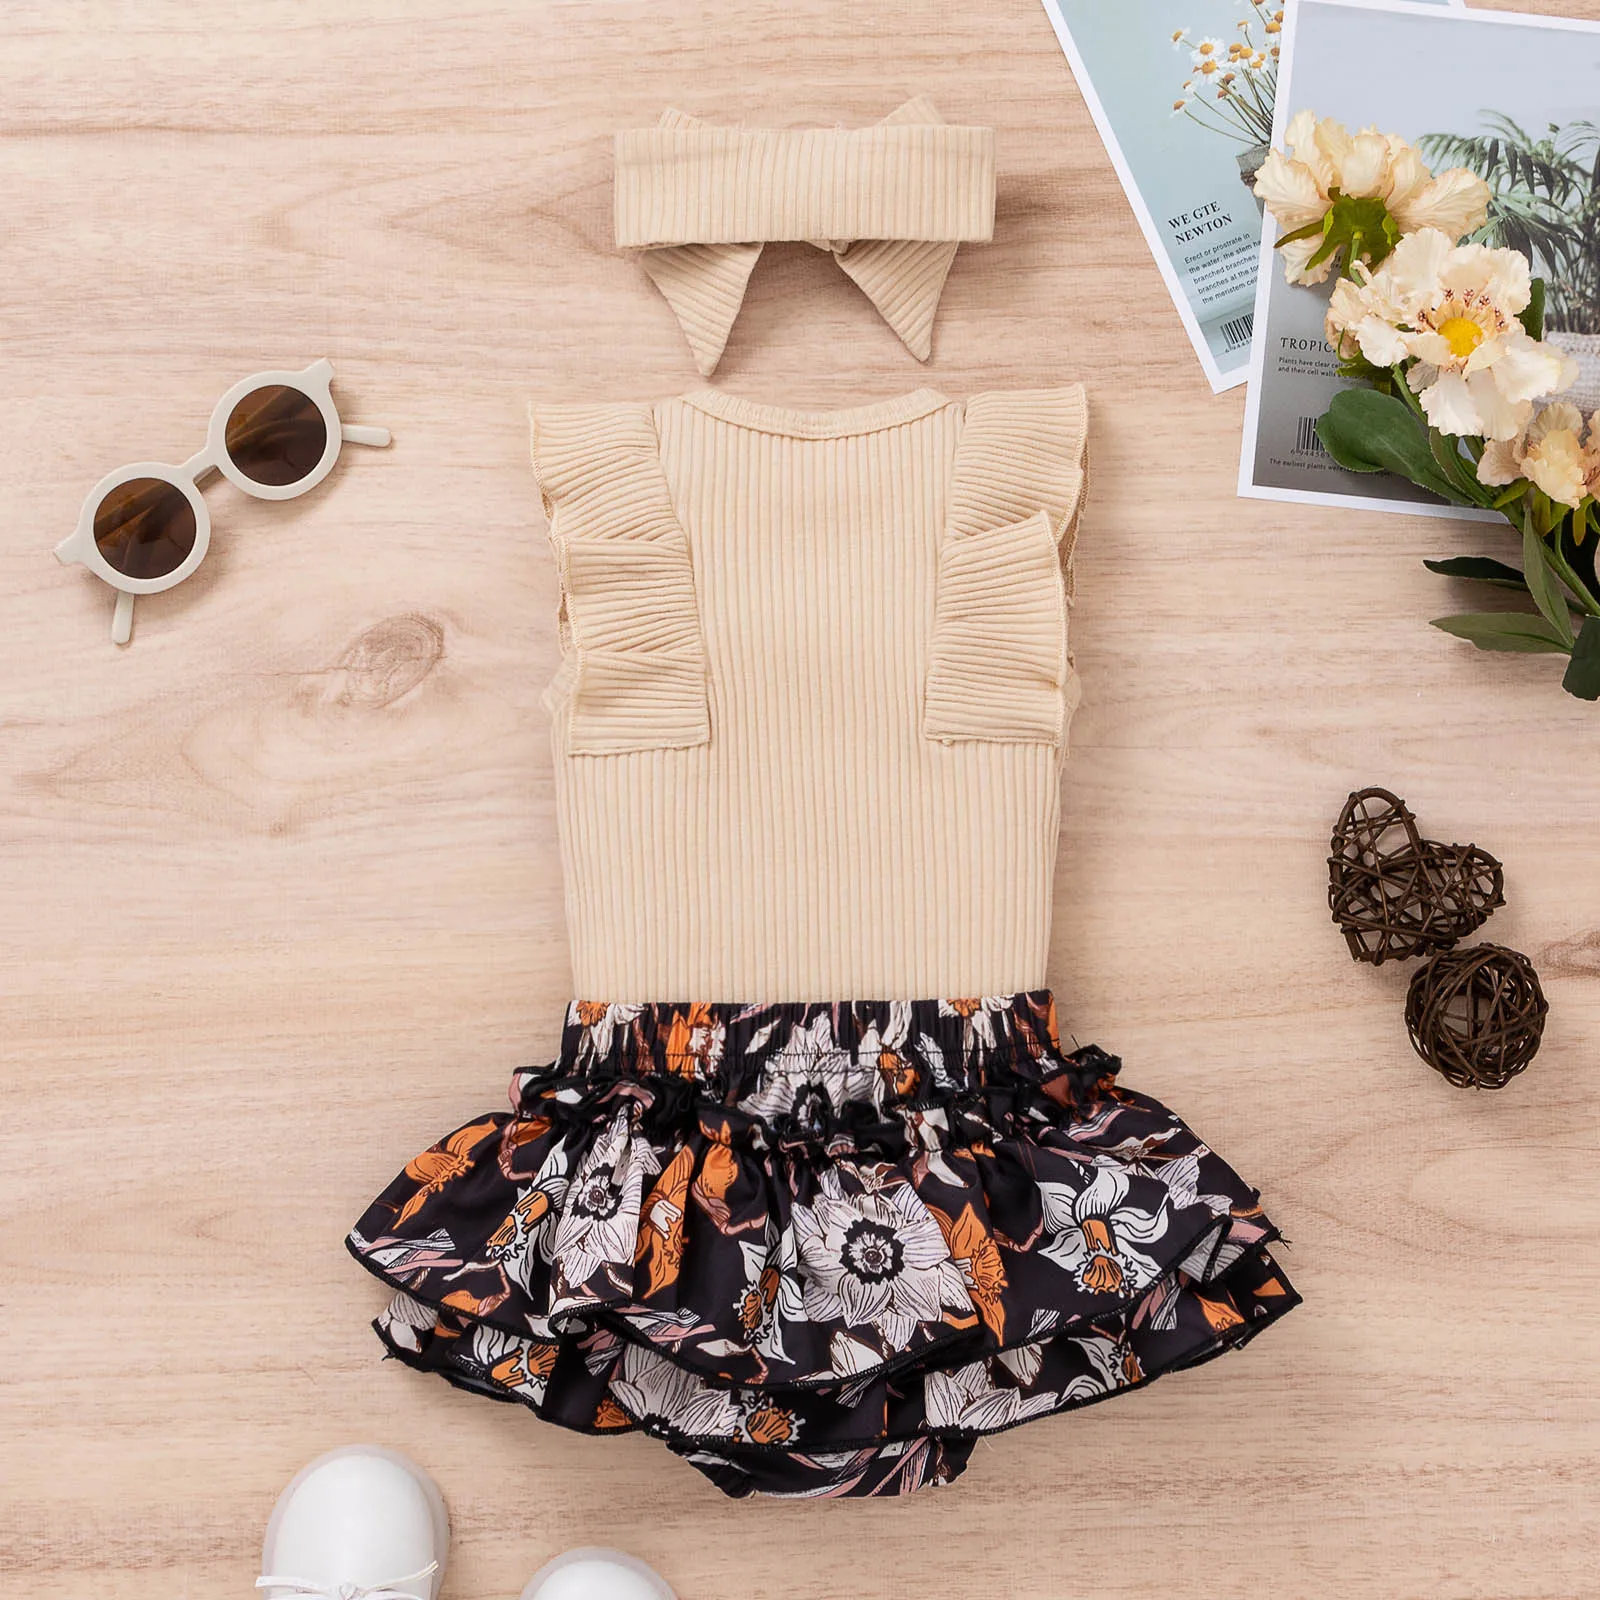 baby dress set for girl Baby Girl Clothes Set Sleeveless Ribbed Romper Bodysuits Ruffles Floral Printed Shorts Headbands Newborn Outfit комплекты одежды baby shirt clothing set